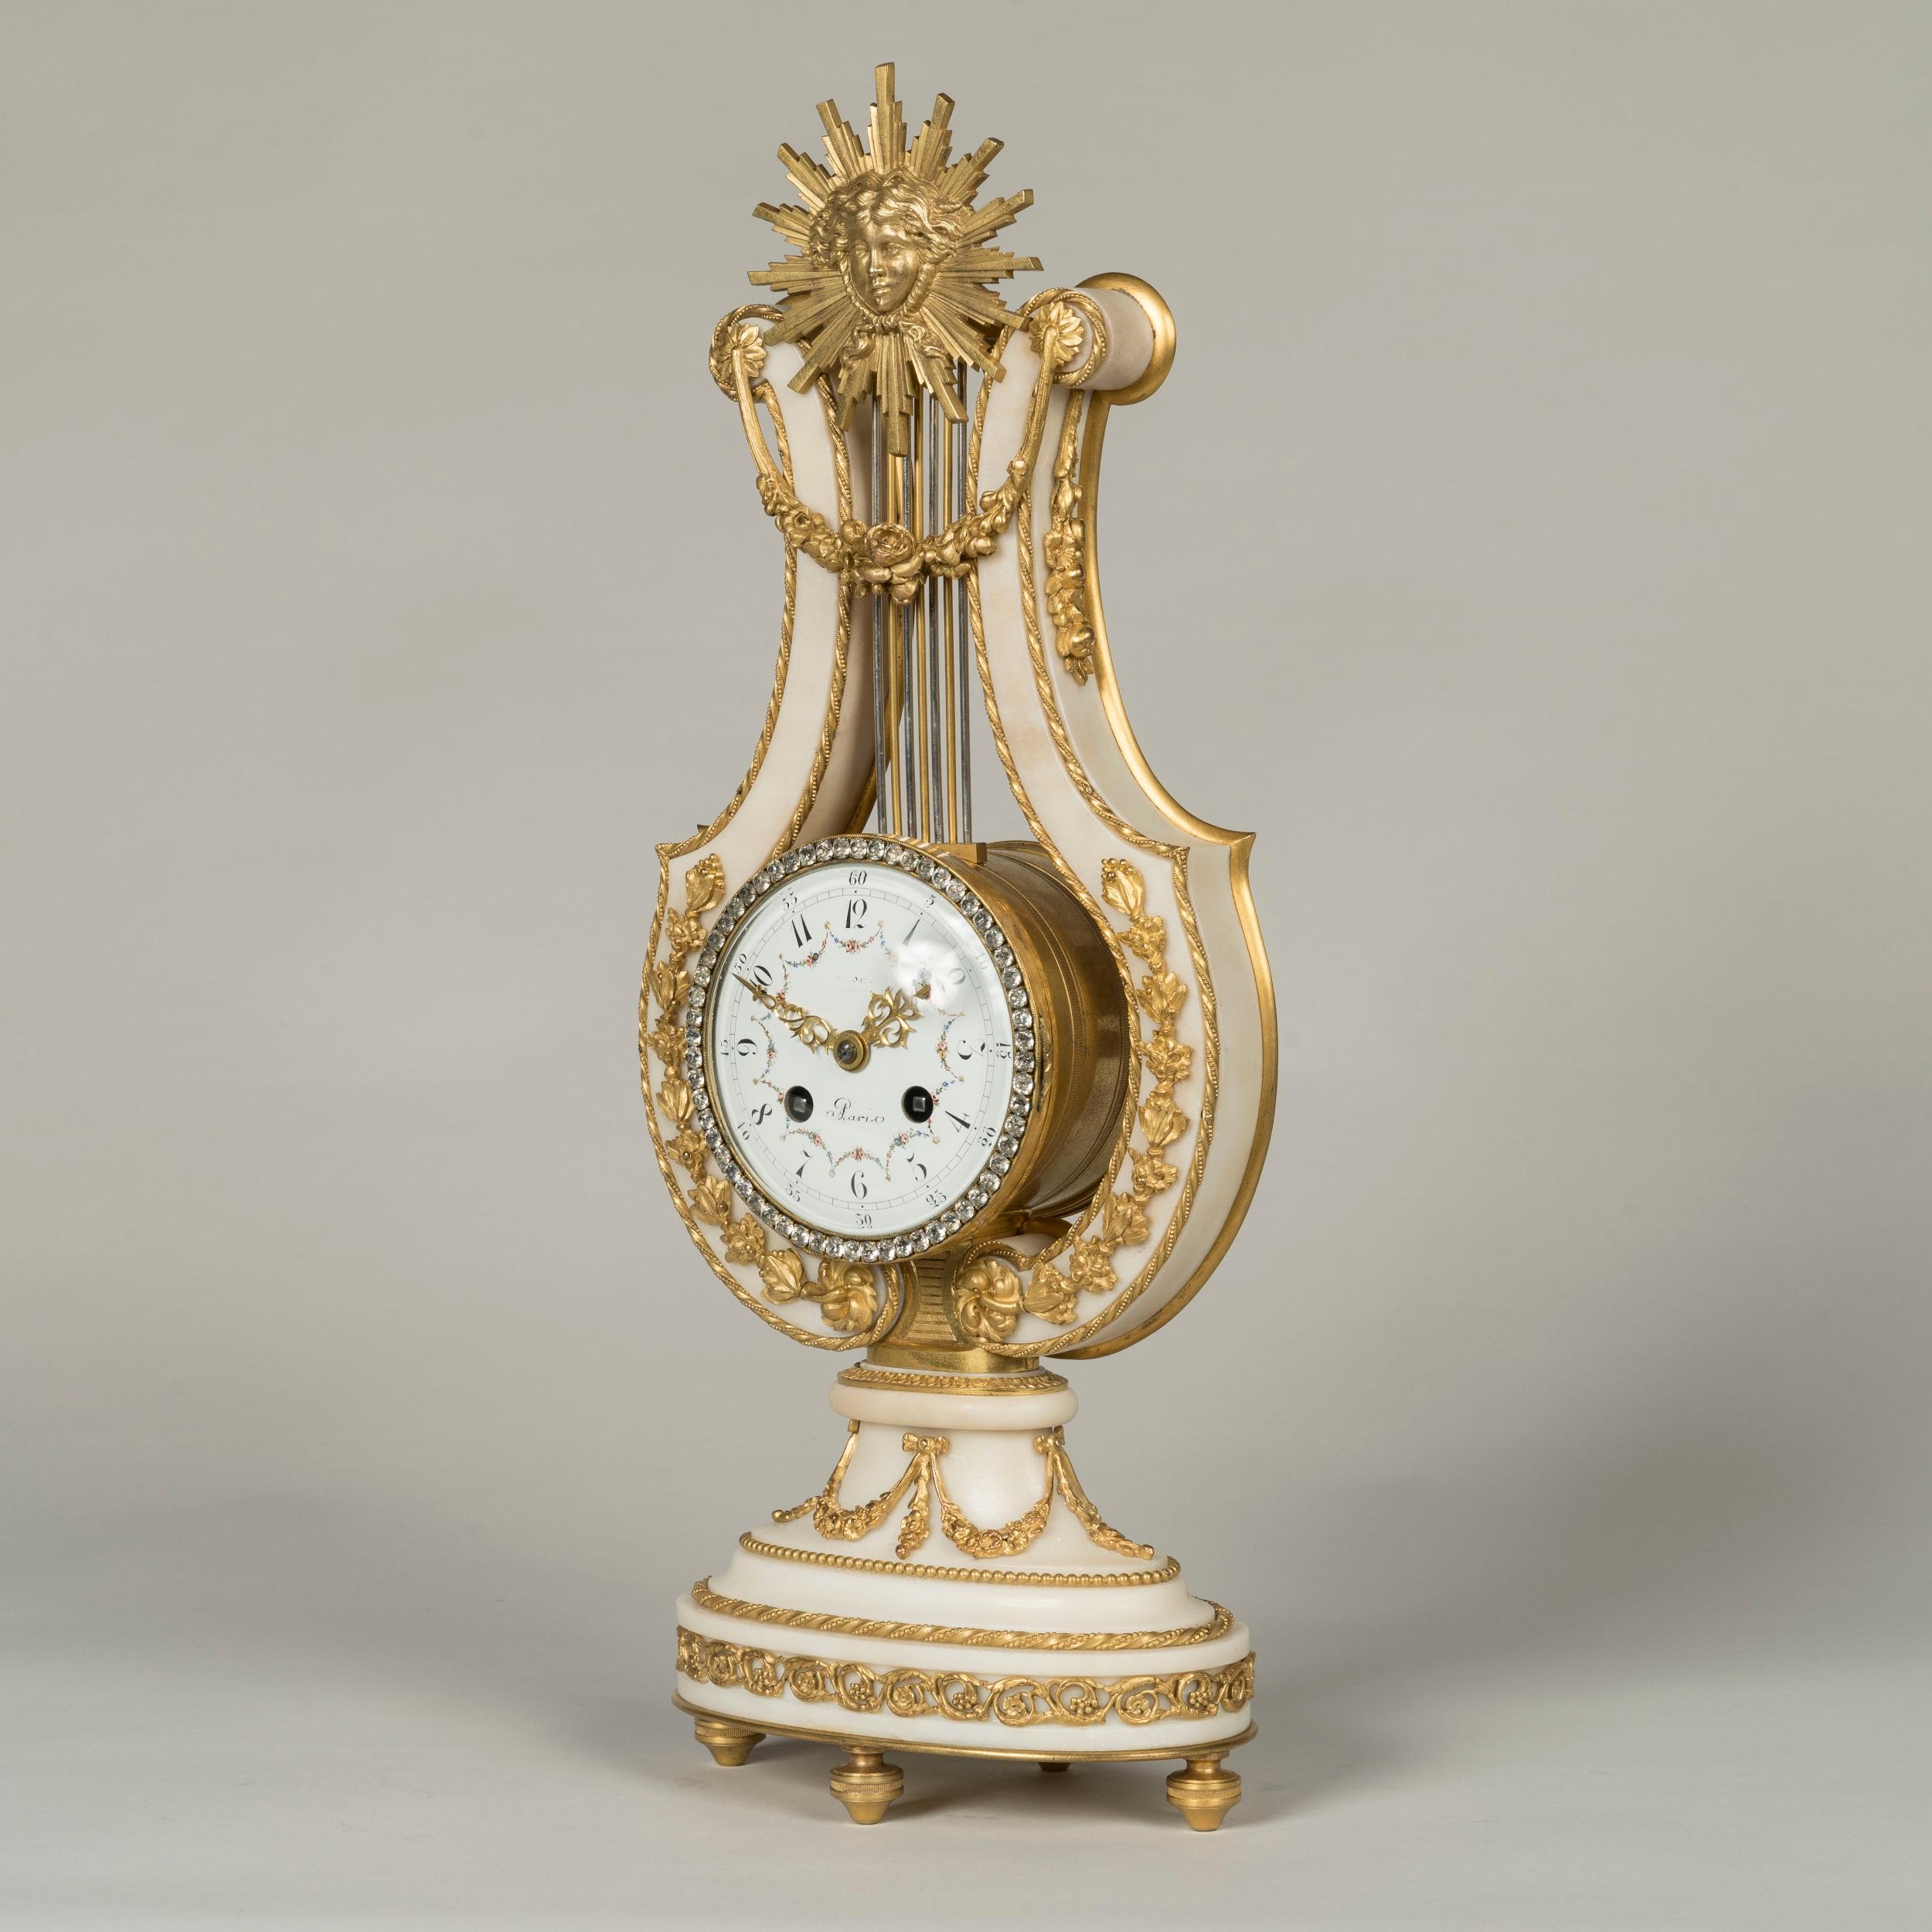 A French Clock Garniture
in the Louis XVI Manner

The clock and its accompanying candelabra constructed in gilt bronze mounted Italian Carrara marble; the timepiece with stepped elliptical base rising from toupie feet, dressed with running rinceaux